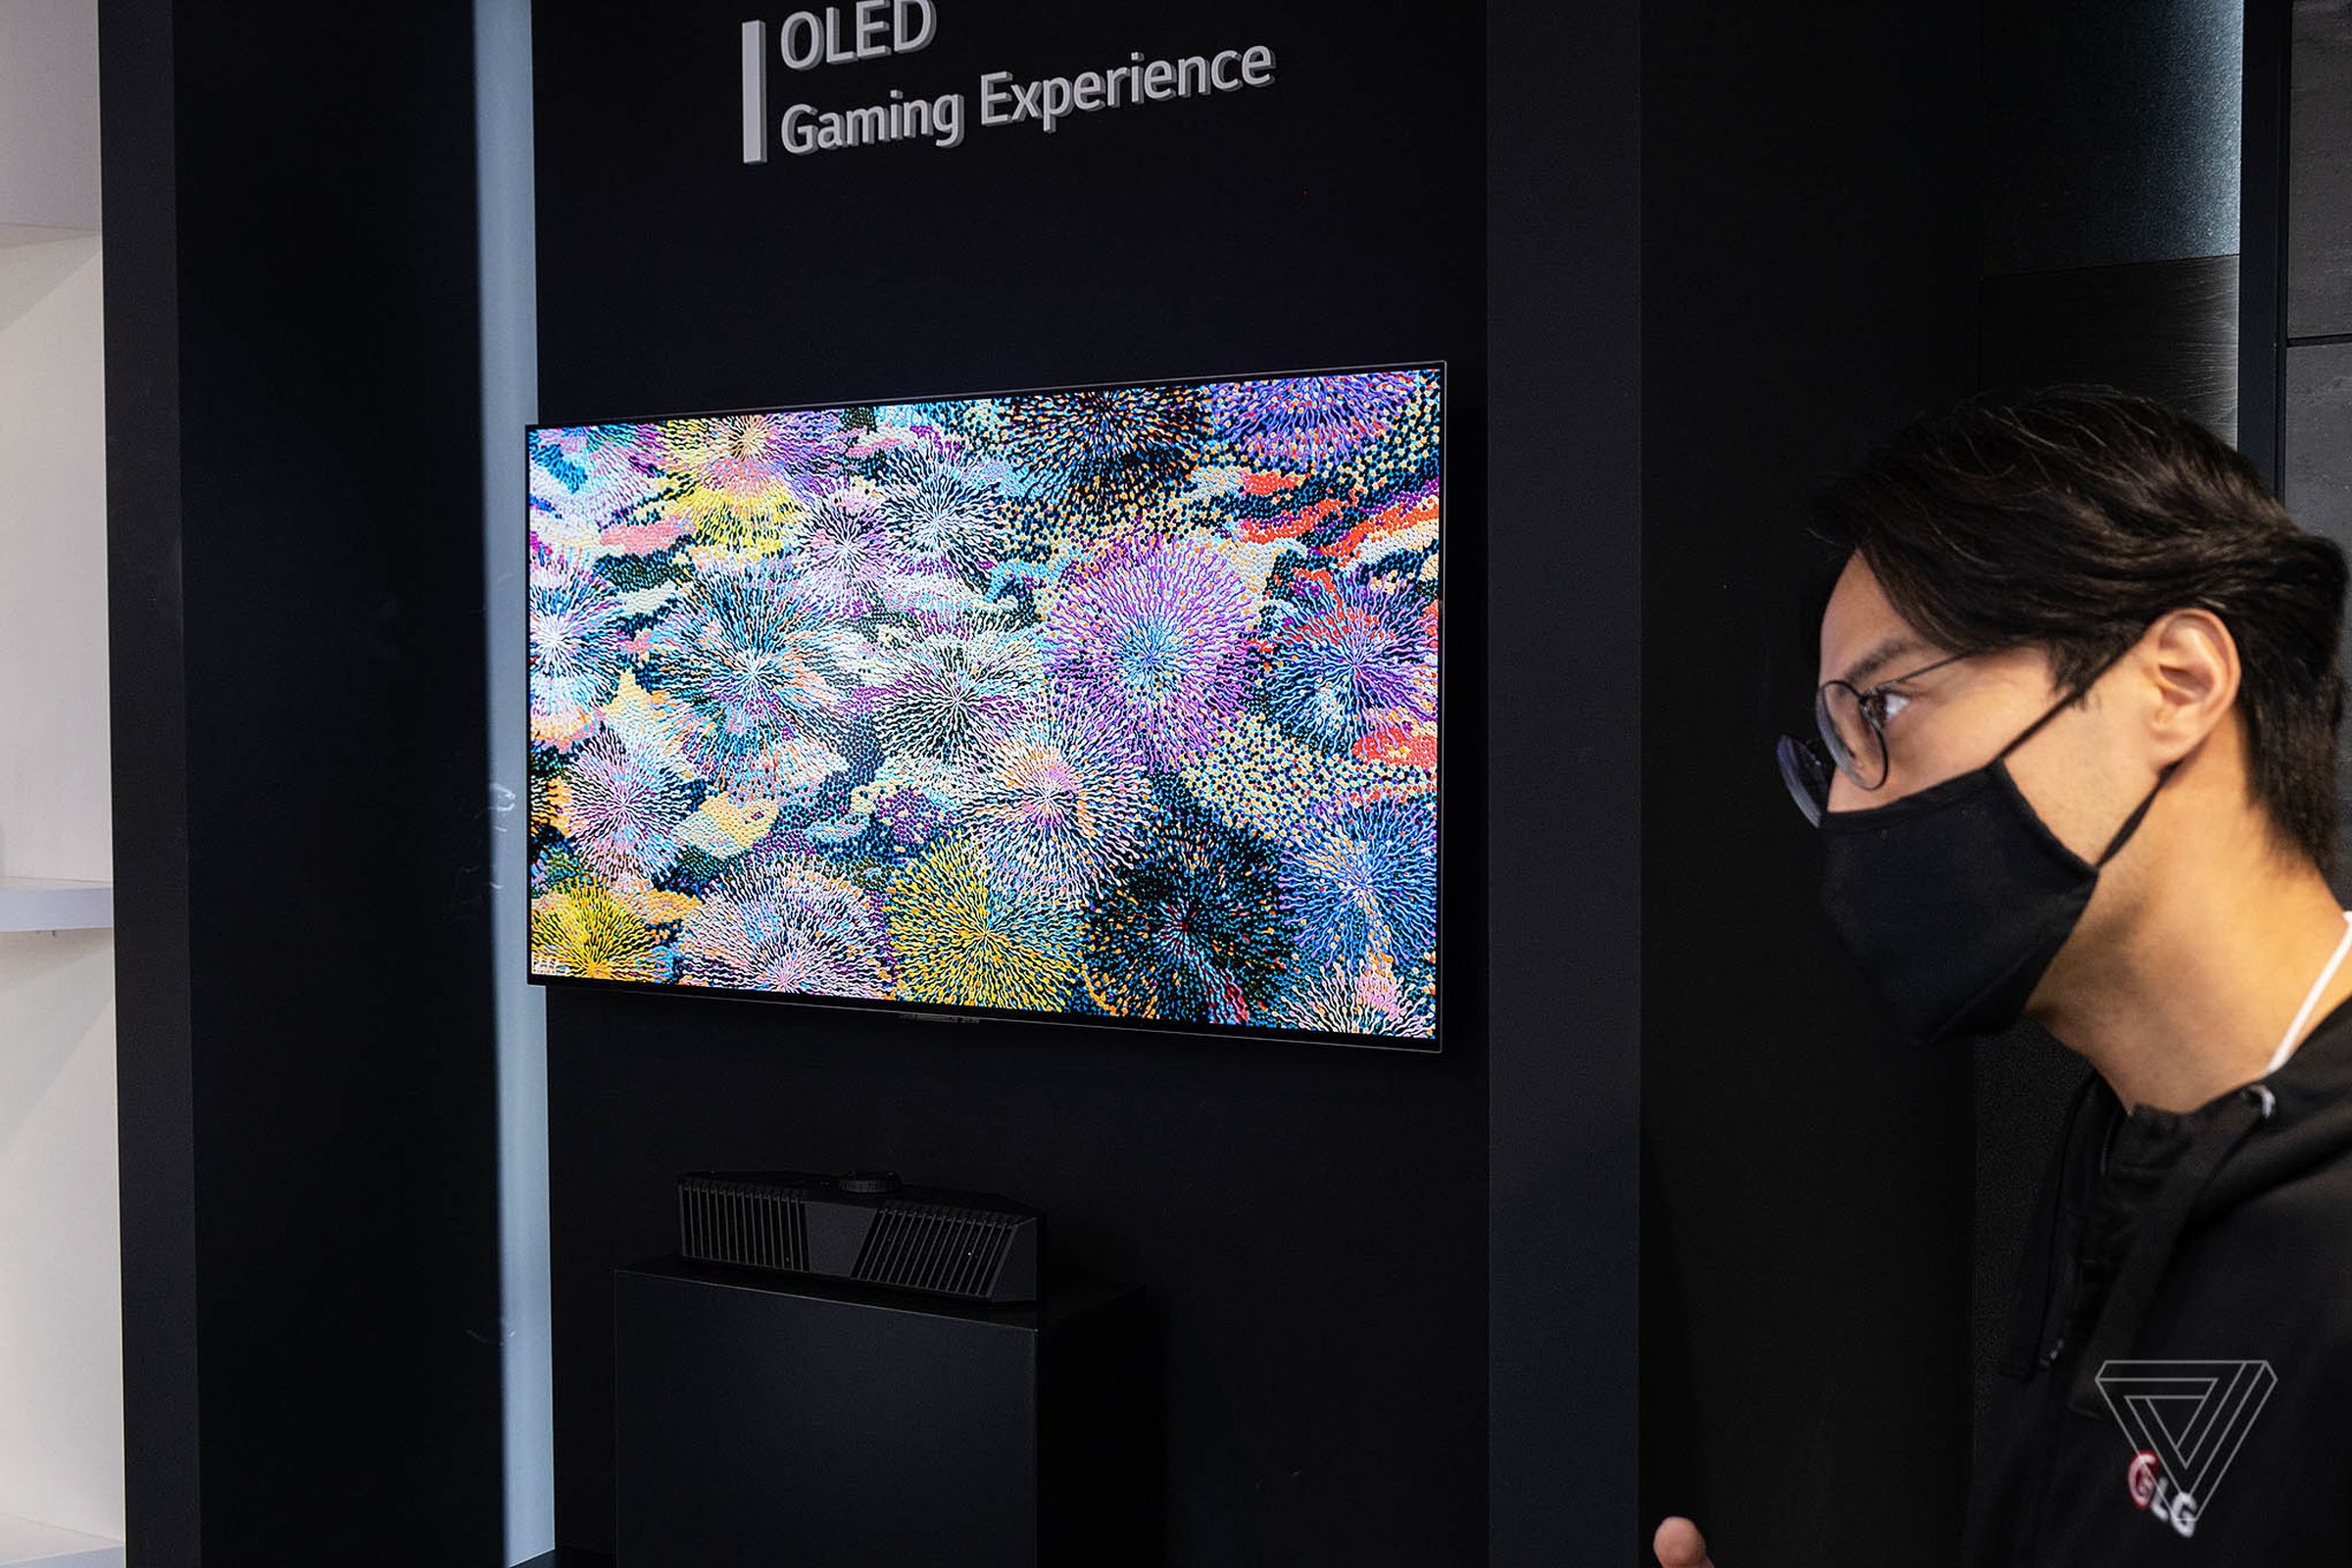 LG’s 2022 OLED lineup includes a 42-inch model that could be perfect as a gaming monitor.